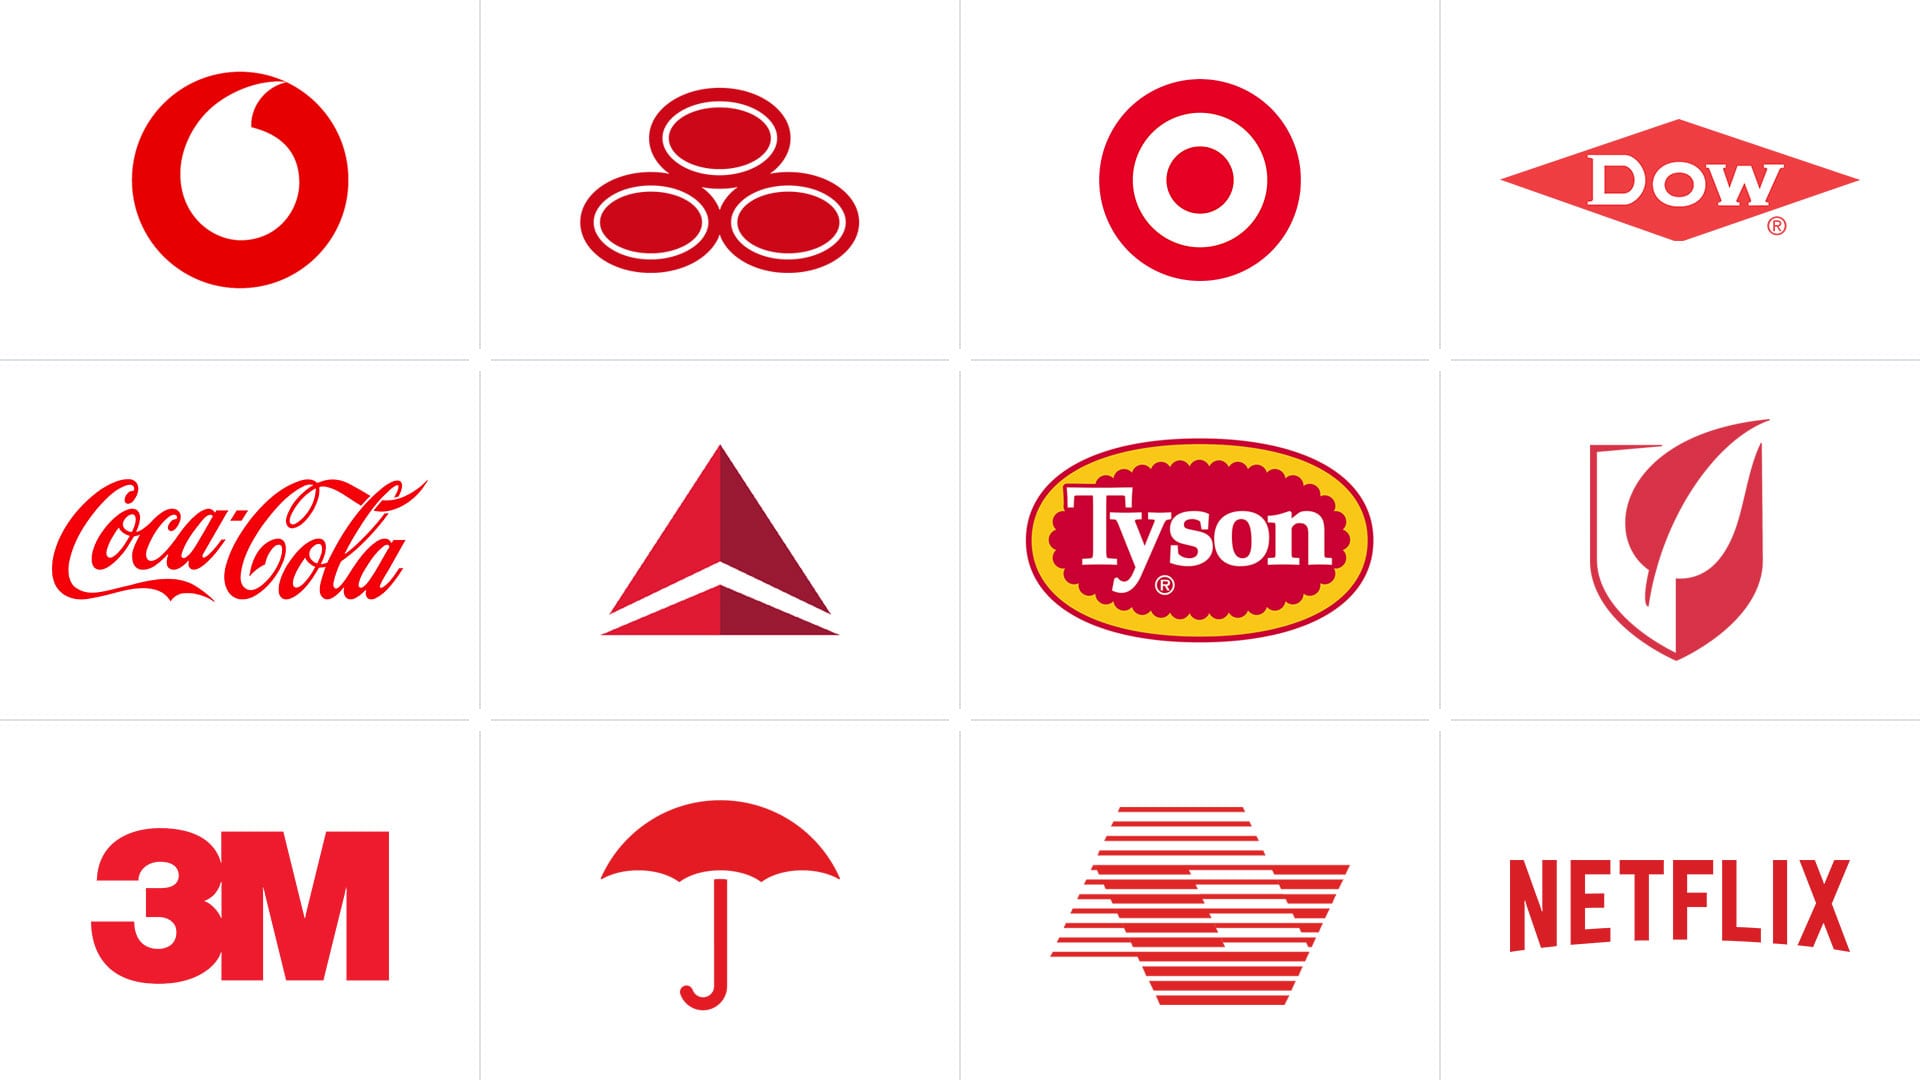 Red Color Usage Examples in Popular Logos